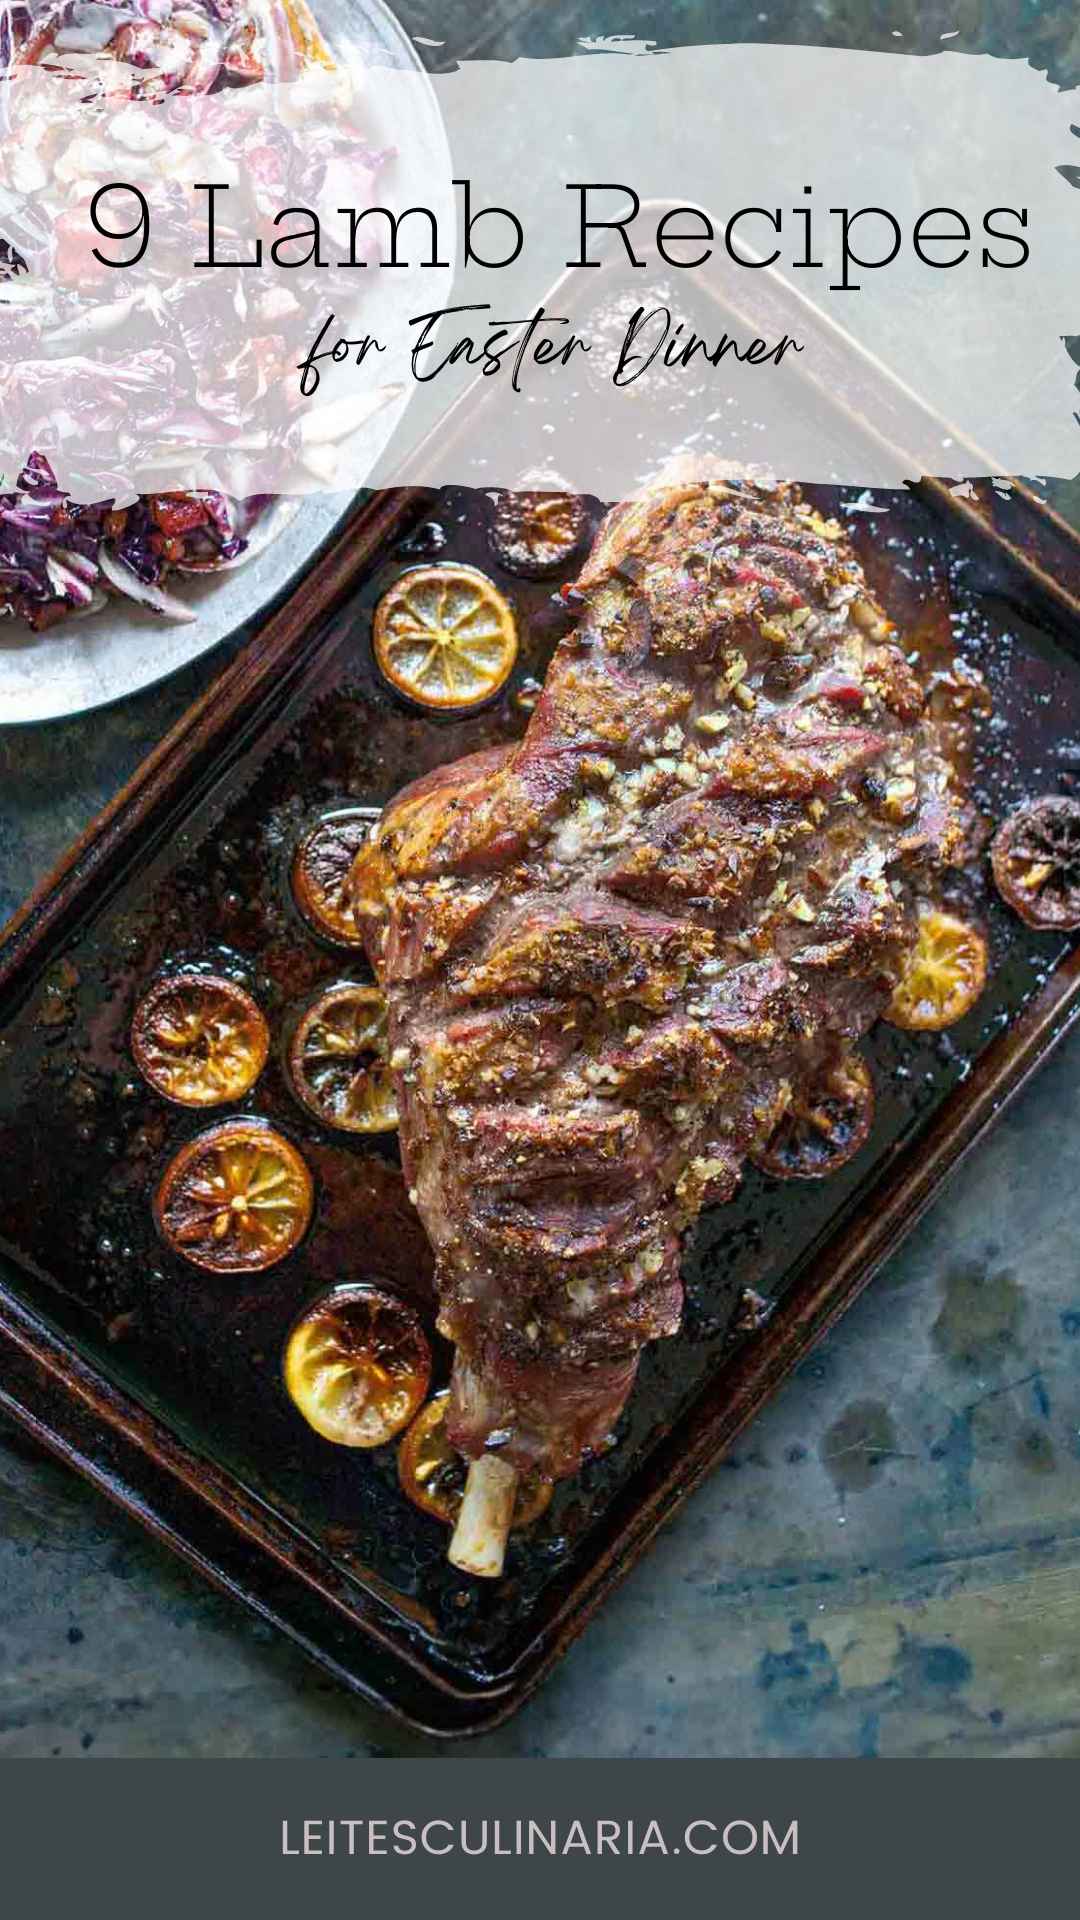 A roast leg of lamb topped with browned lemon slices on a rimmed baking sheet.